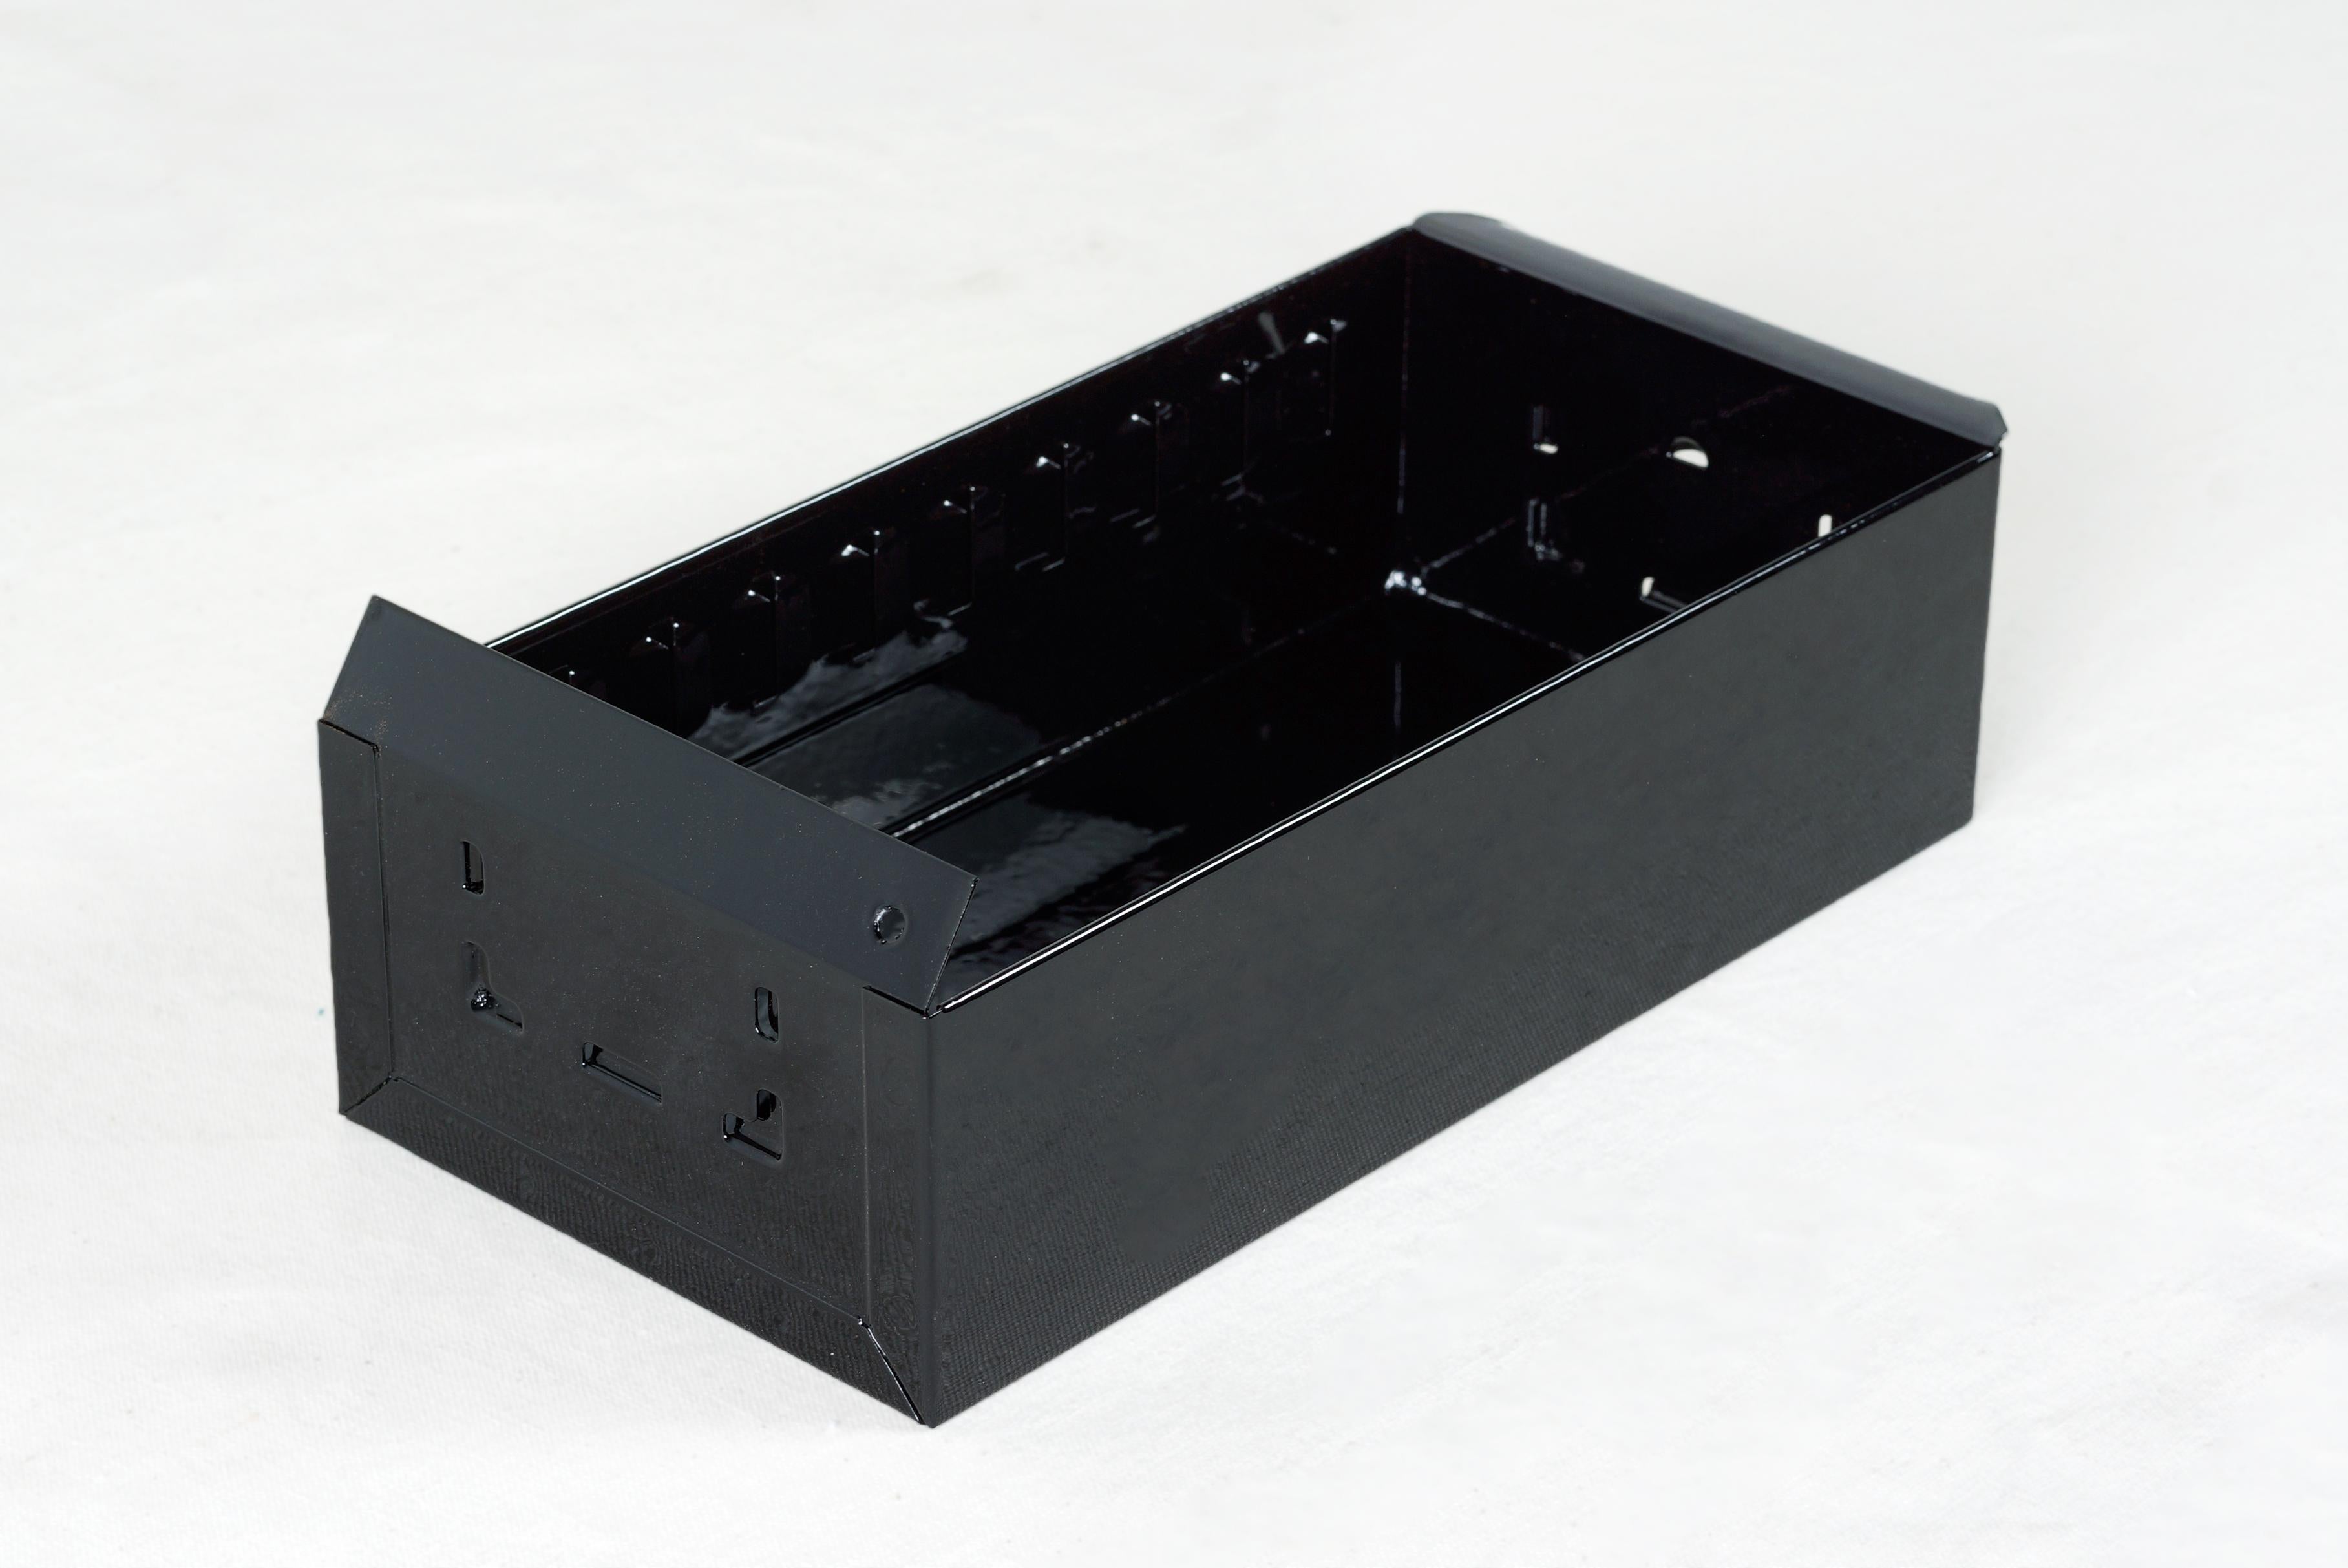 We refinished two matching 1950s steel filing drawers with a gloss black powder coat. These classic, heavy-duty organizational bins are perfect for storing anything from office supplies to recipe cards. 

Two available. Sold separately.